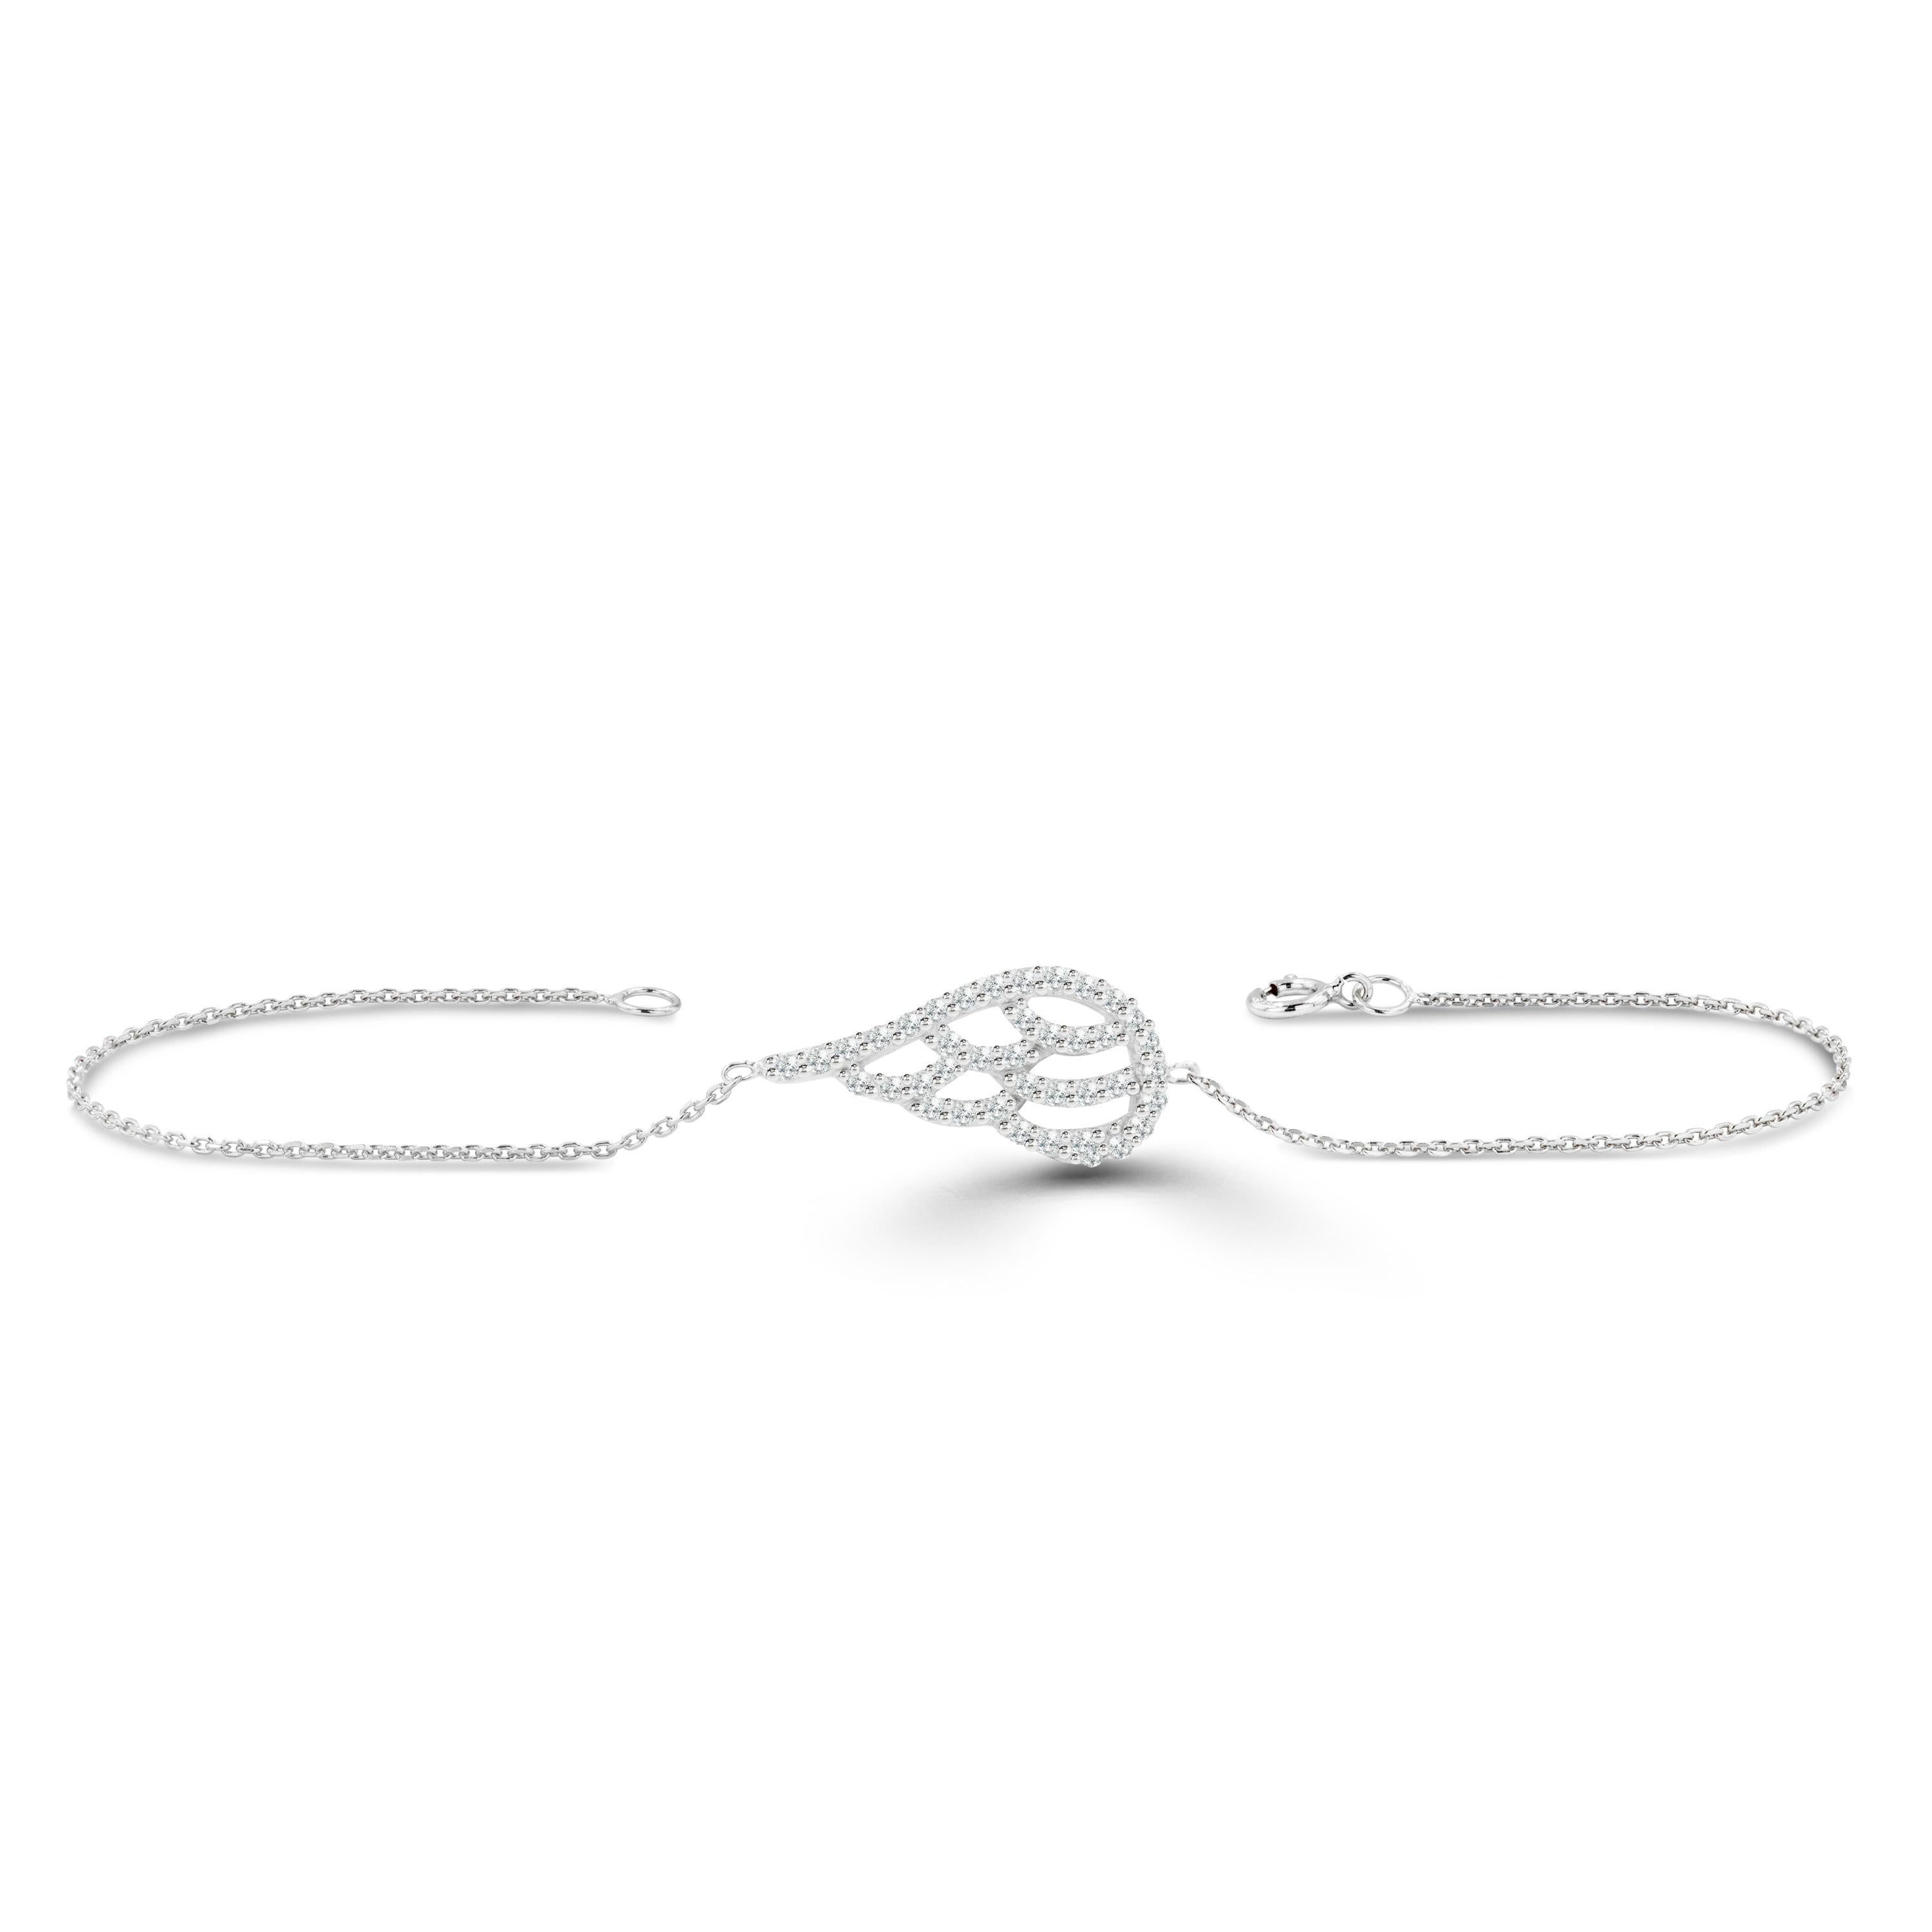 wings of protection charm bangle